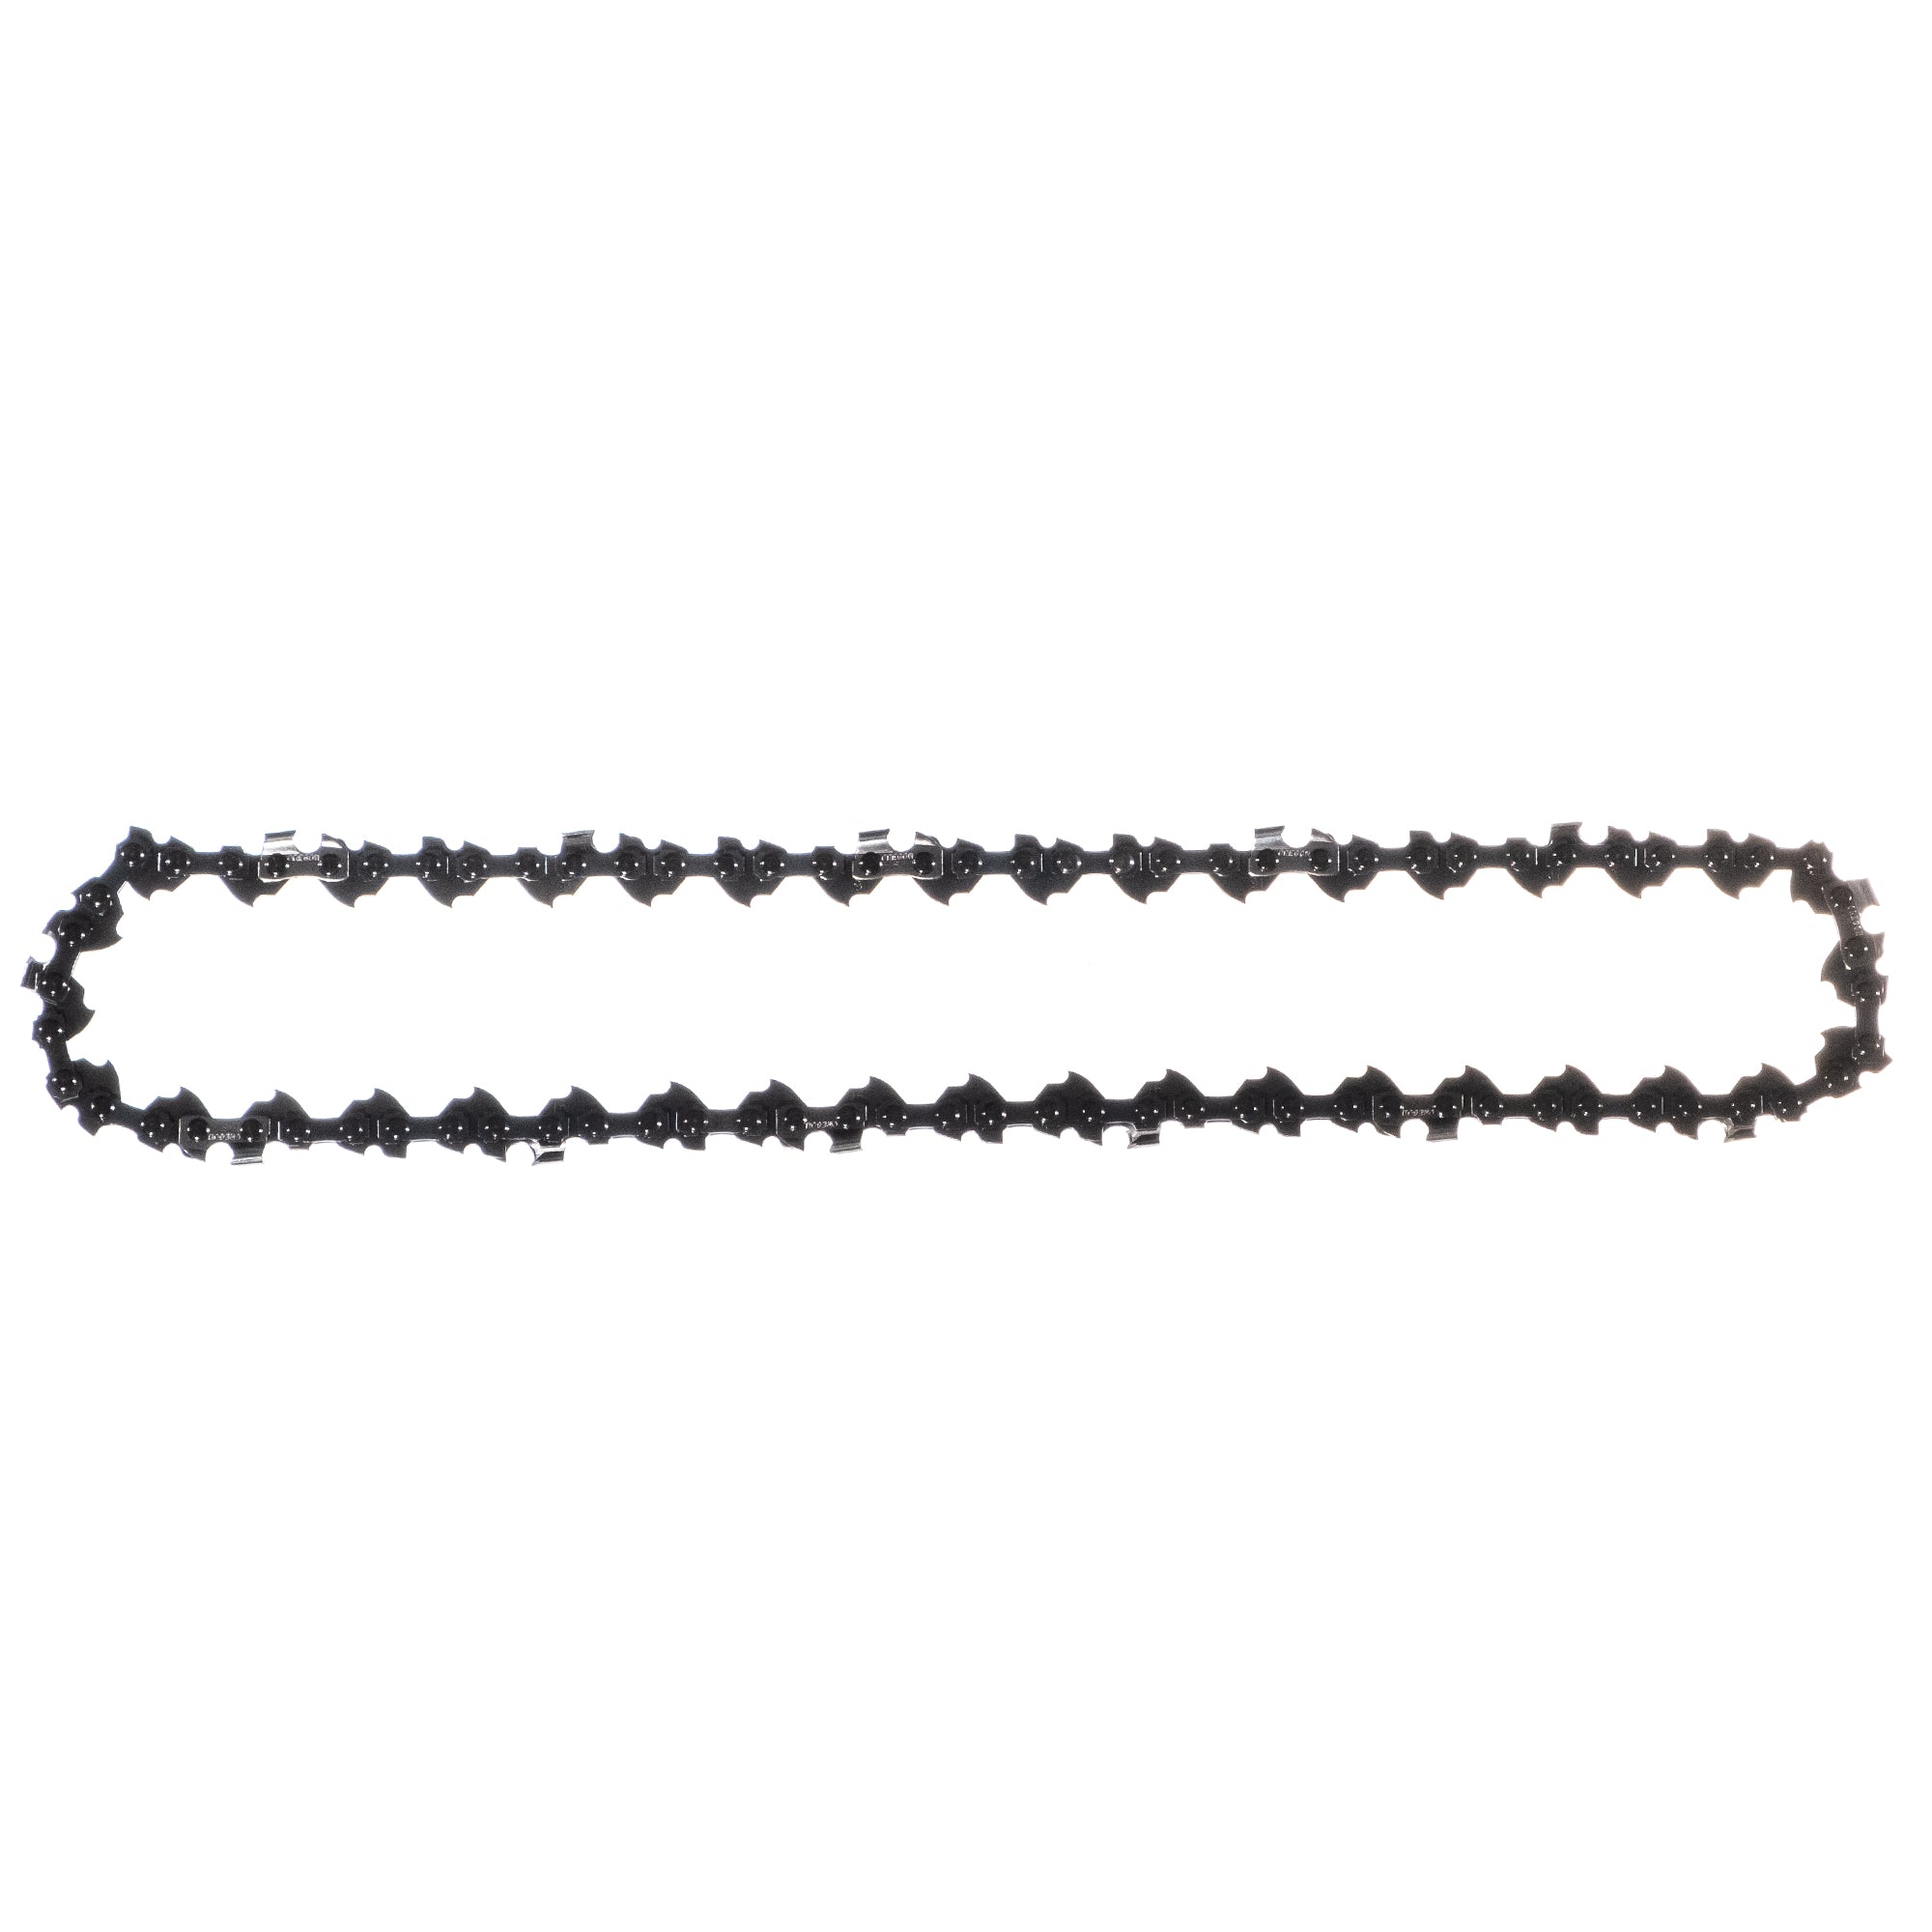 12" Chainsaw Chain for LCS32412, LCS31224S